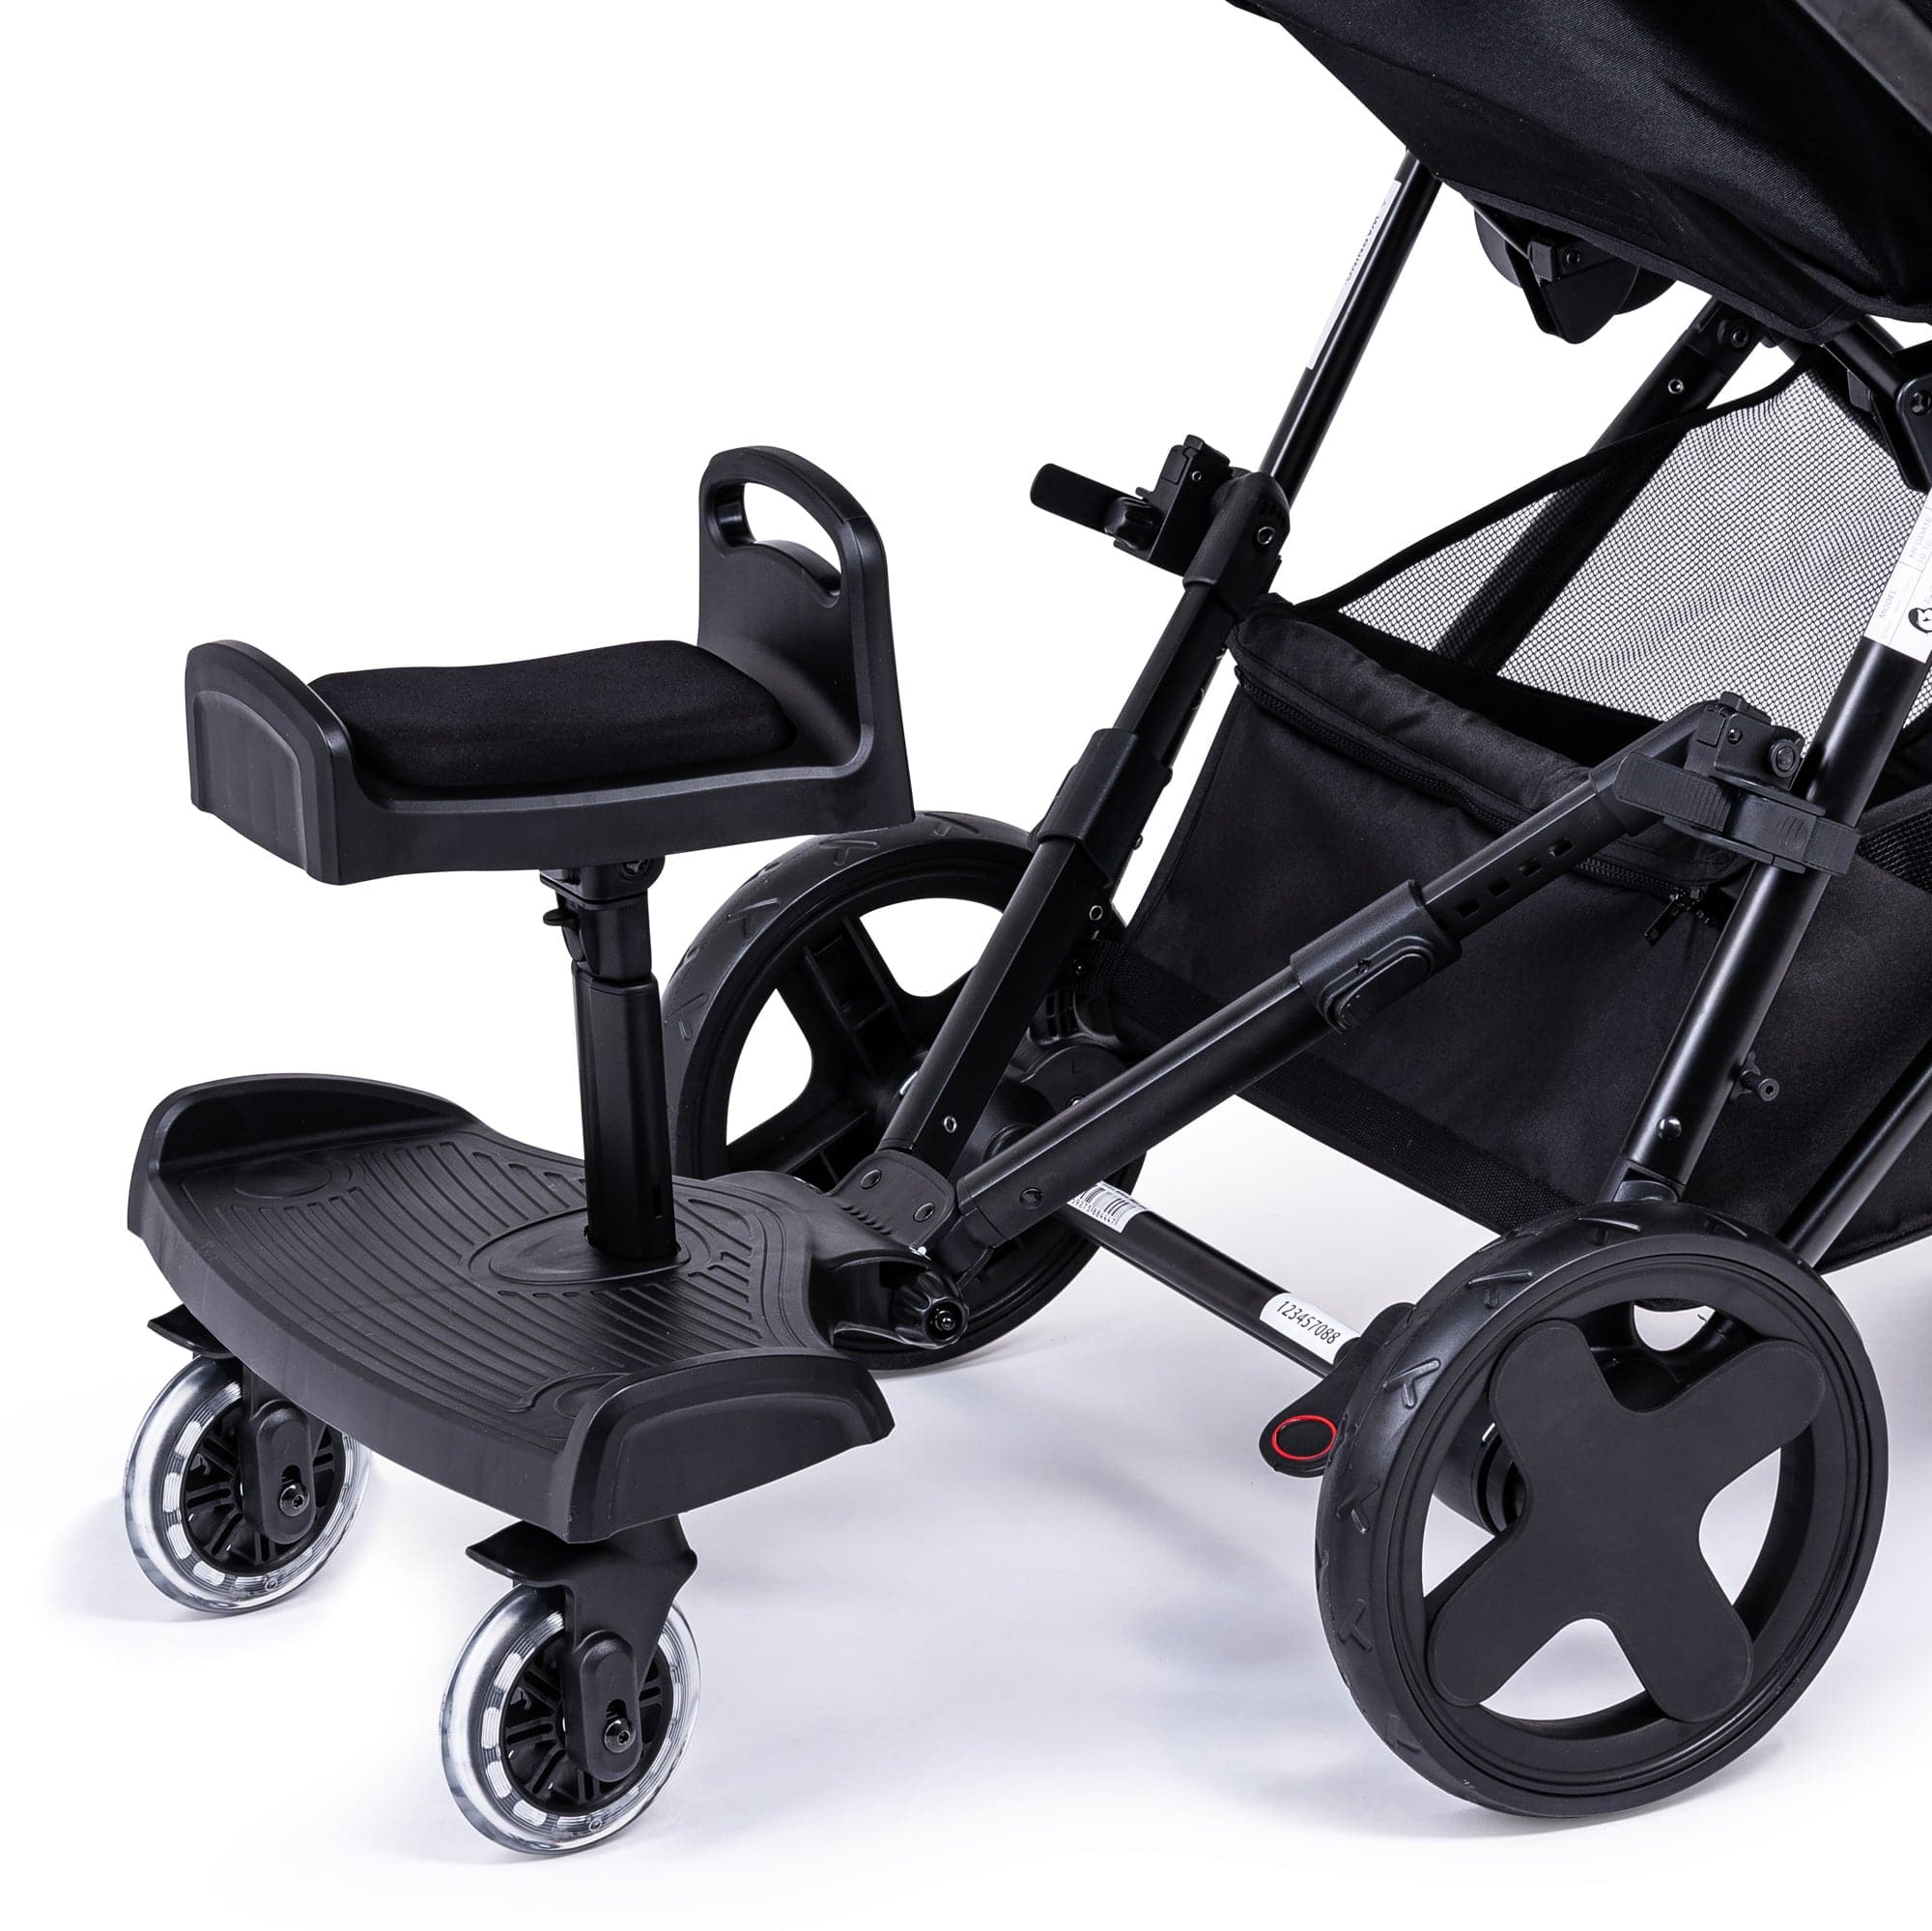 Ride On Board with Seat Compatible with Zeta - For Your Little One